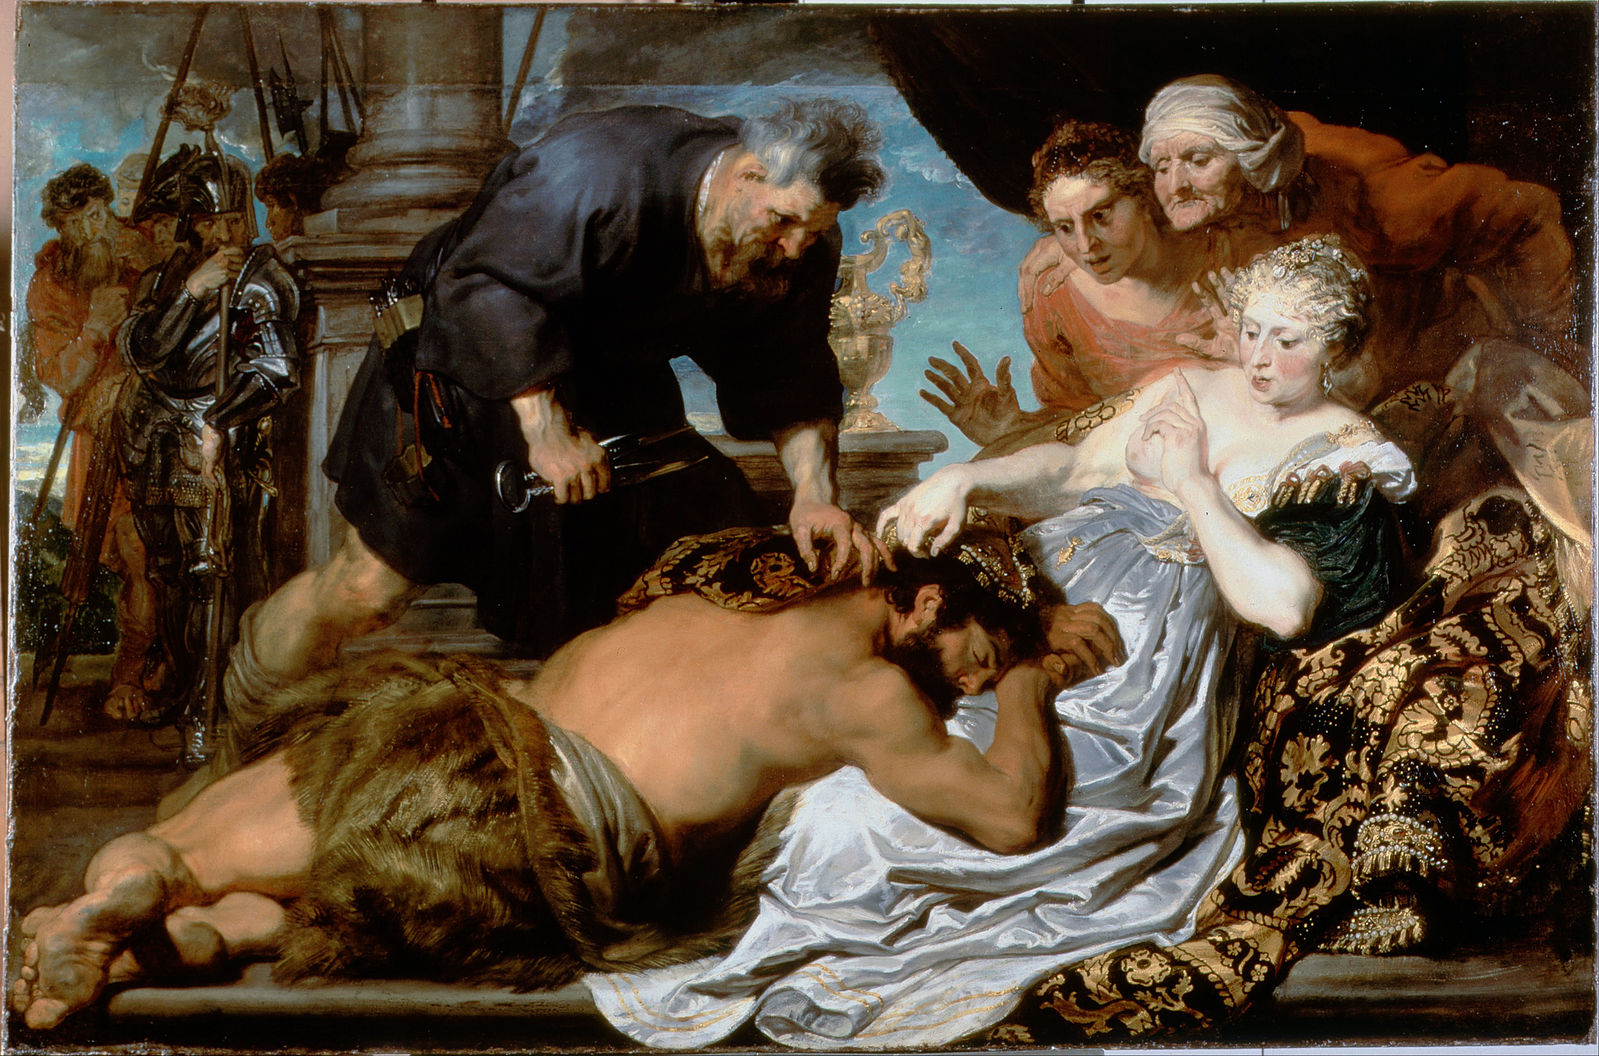 Anthony van Dyck, Samson and Delilah, c. 1618-20, oil on canvas, 152.3 x 232 cm. (Dulwich Picture Gallery, London)